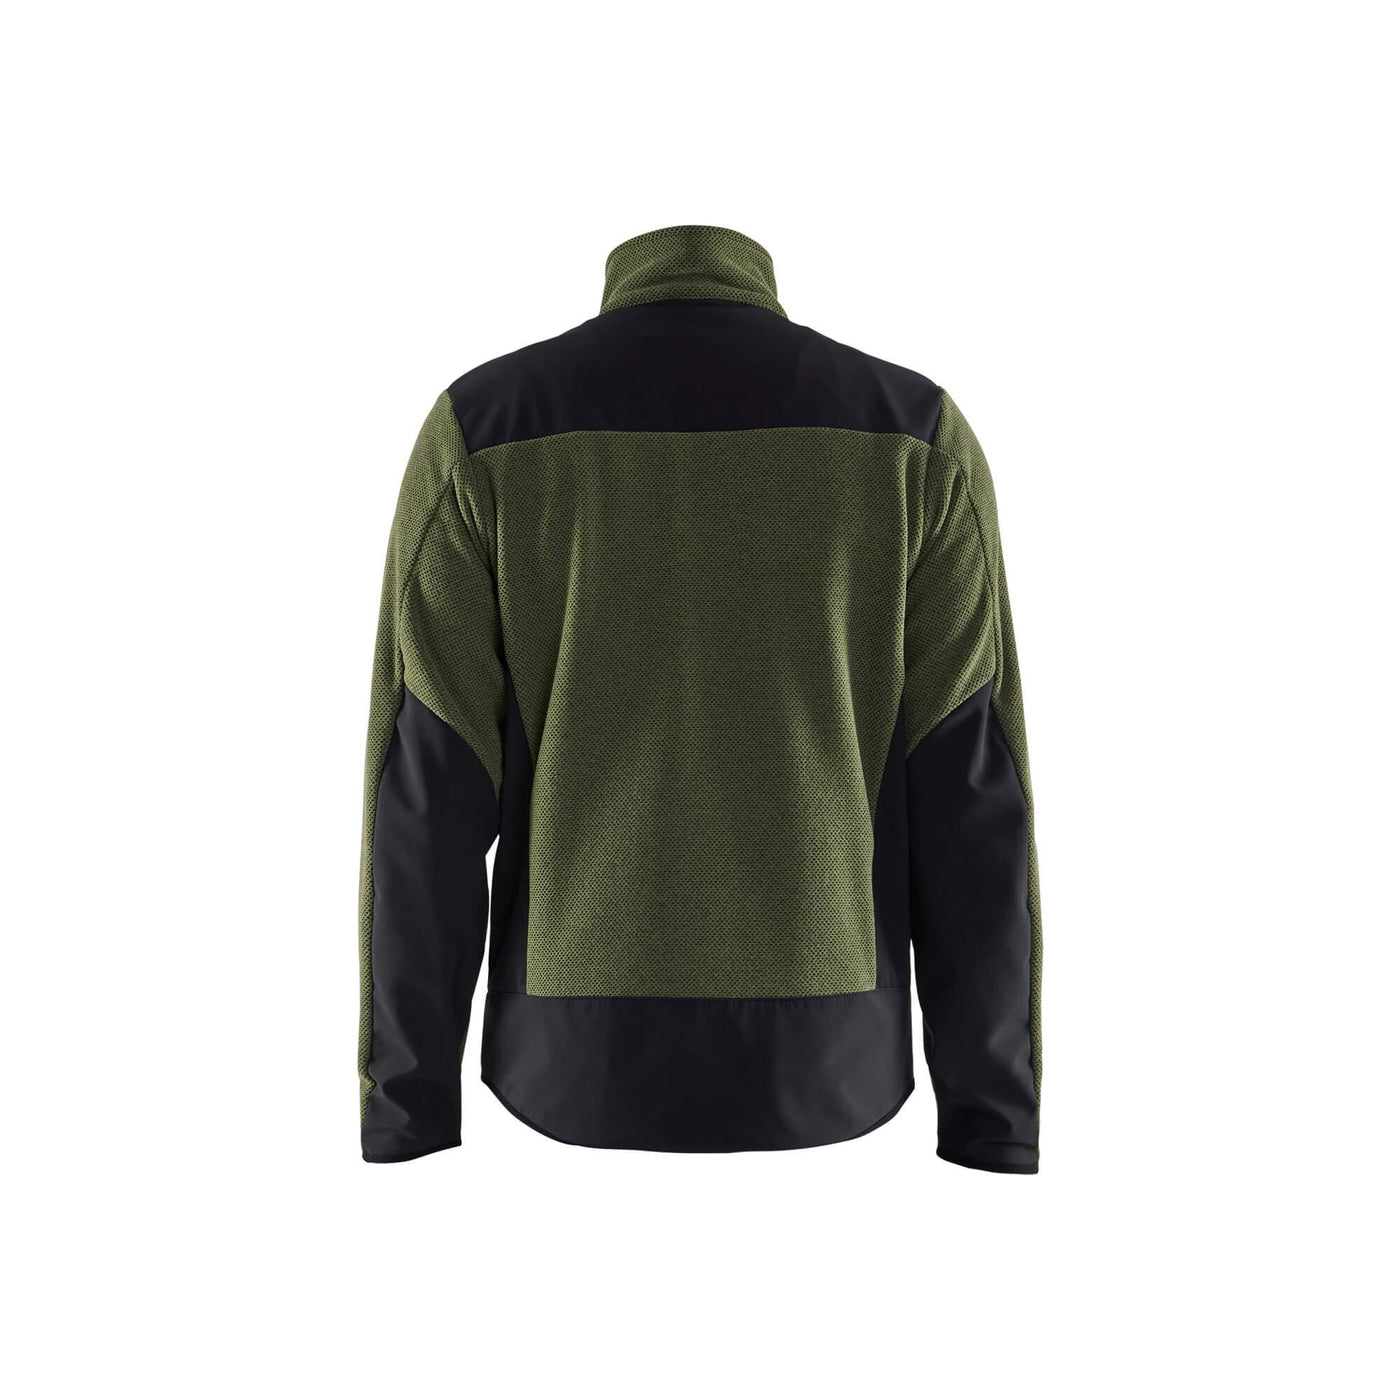 Blaklader 59422536 Knitted Jacket With Softshell Autumn Green/Black Rear #colour_autumn-green-black